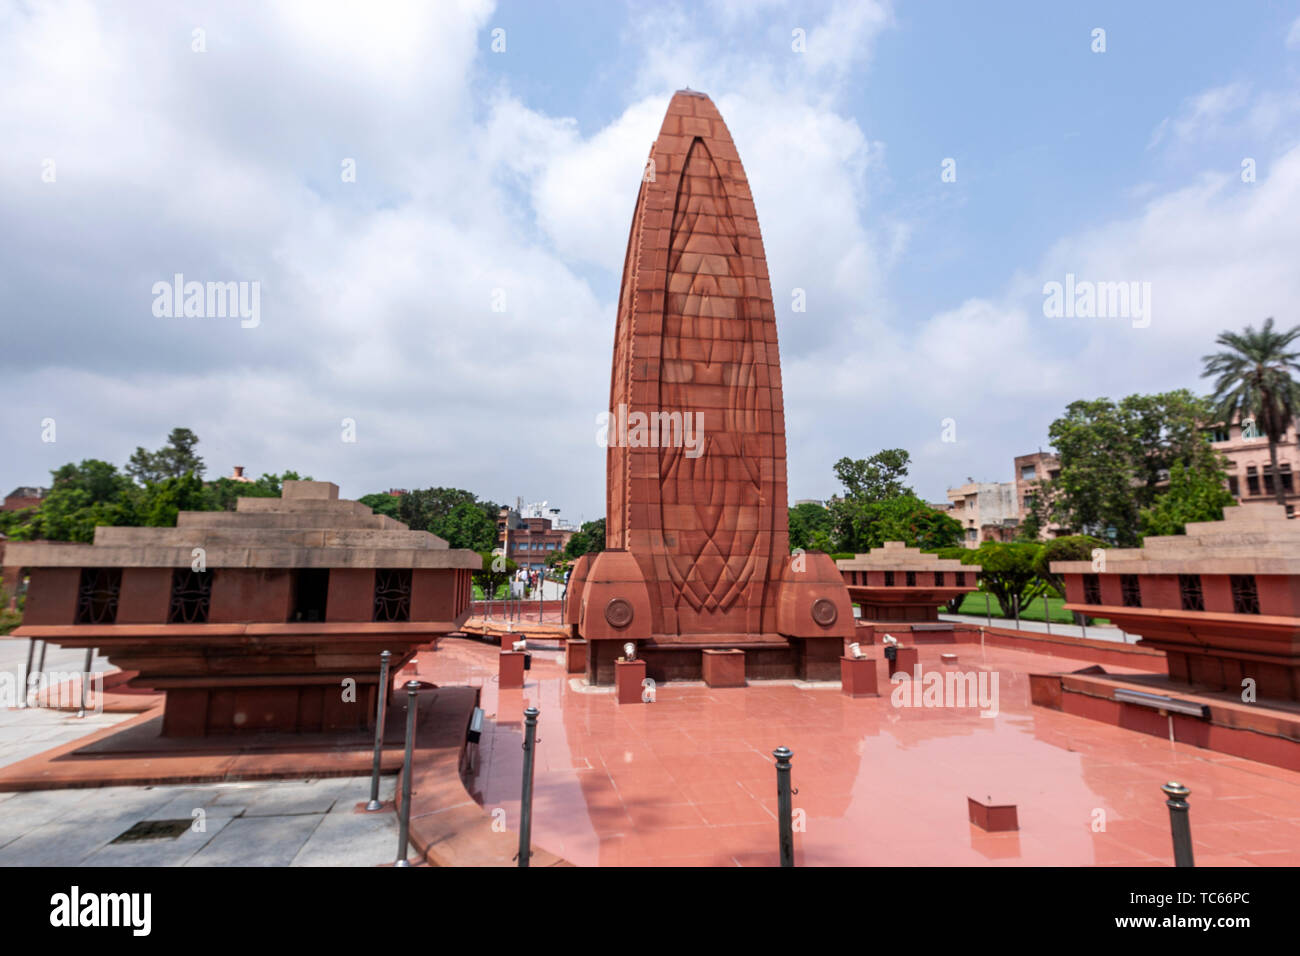 100 Years of The Jallianwala Bagh Massacre | Communist Party of India  (Marxist-Leninist) Liberation